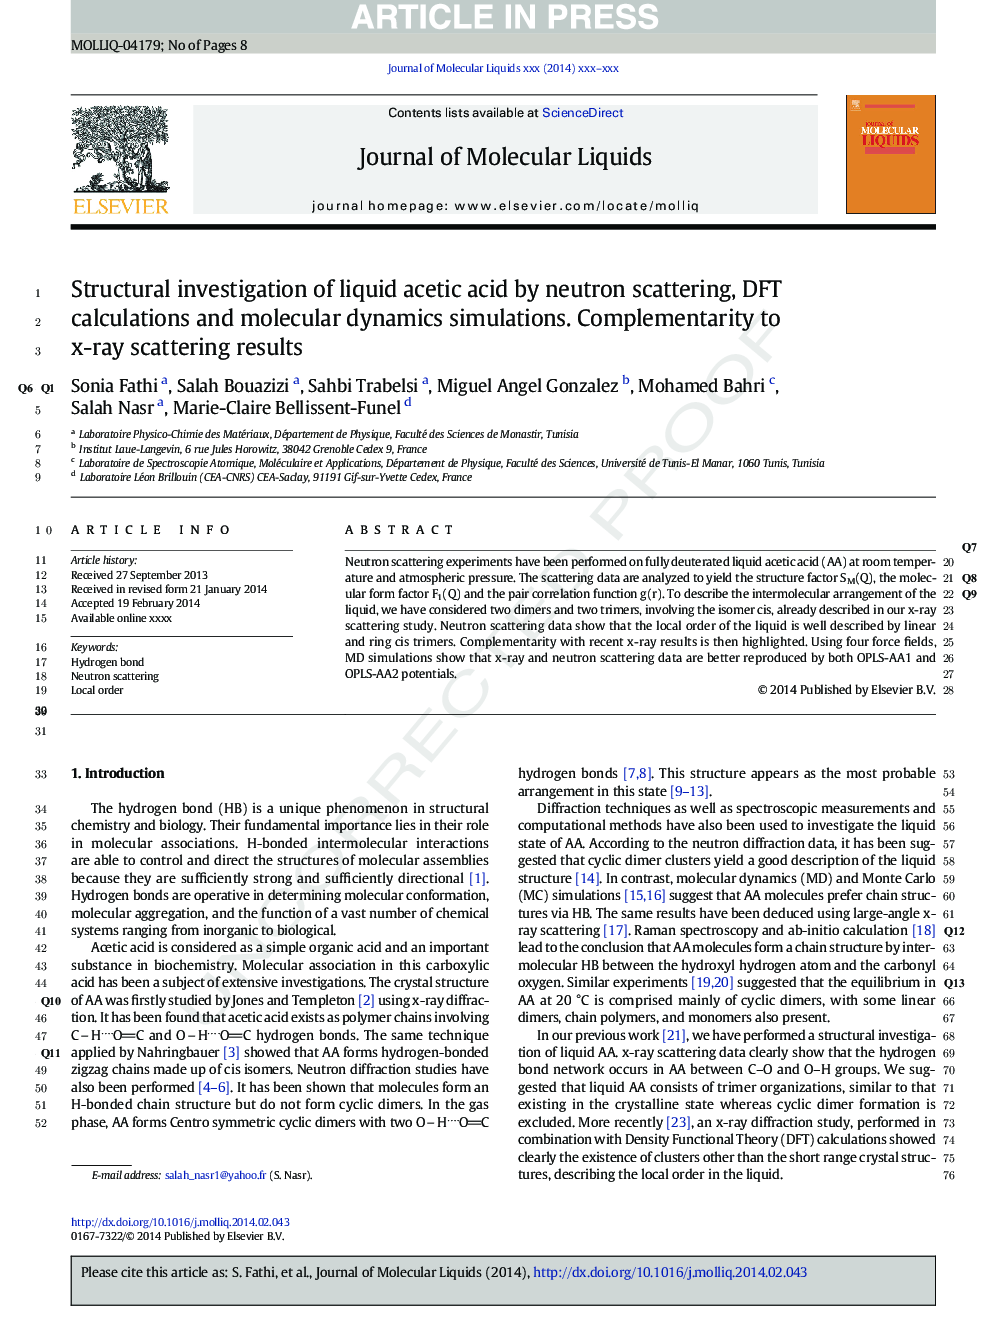 Structural investigation of liquid acetic acid by neutron scattering, DFT calculations and molecular dynamics simulations. Complementarity to x-ray scattering results